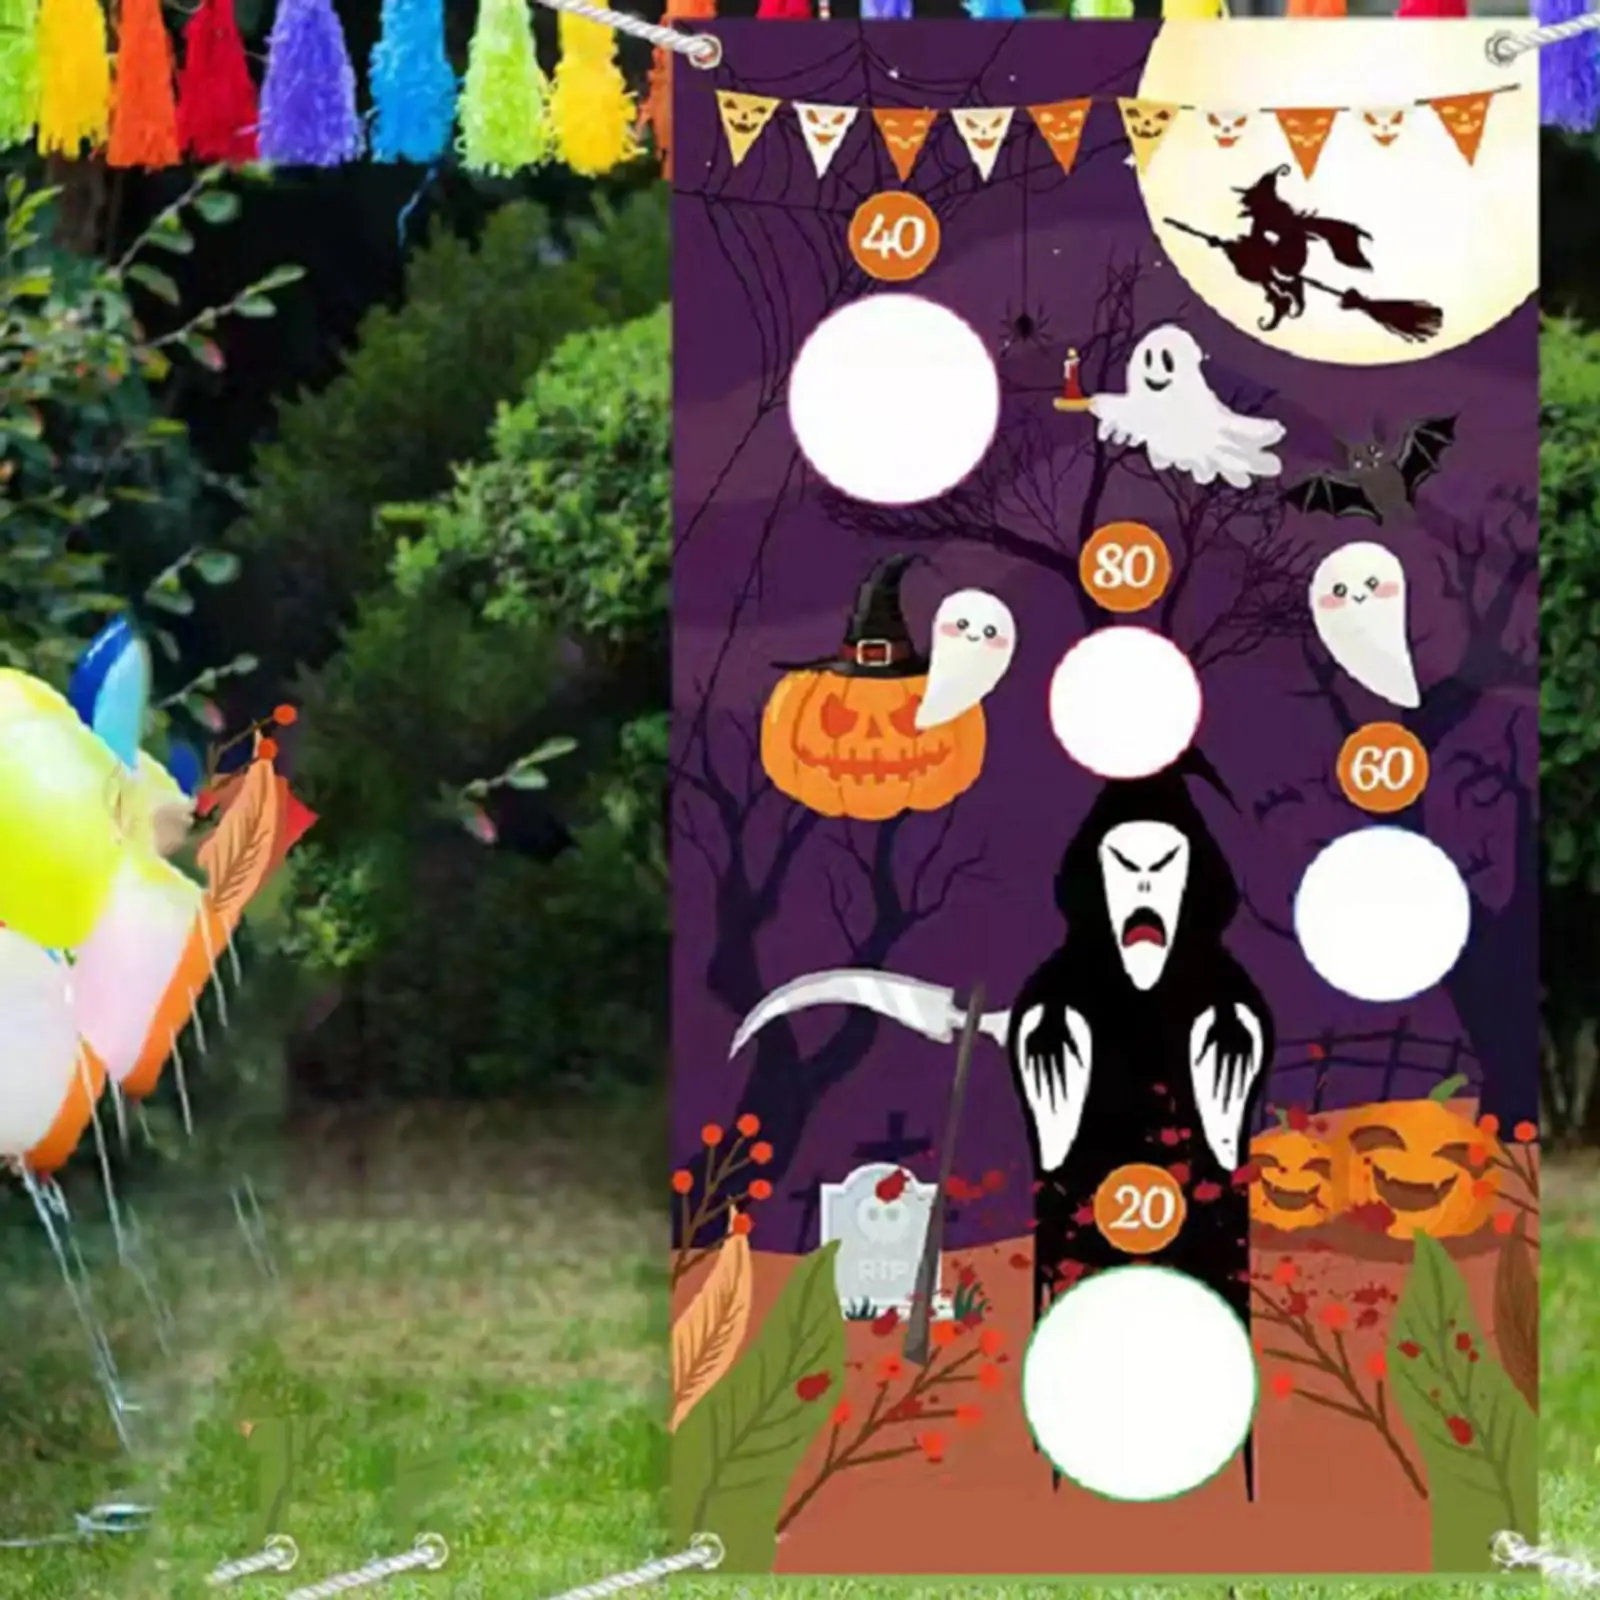 Reusable Halloween Toss Game Hanging Toss Game Banner Party Favor for Courtyard Beach Outdoor Game Toys Activities